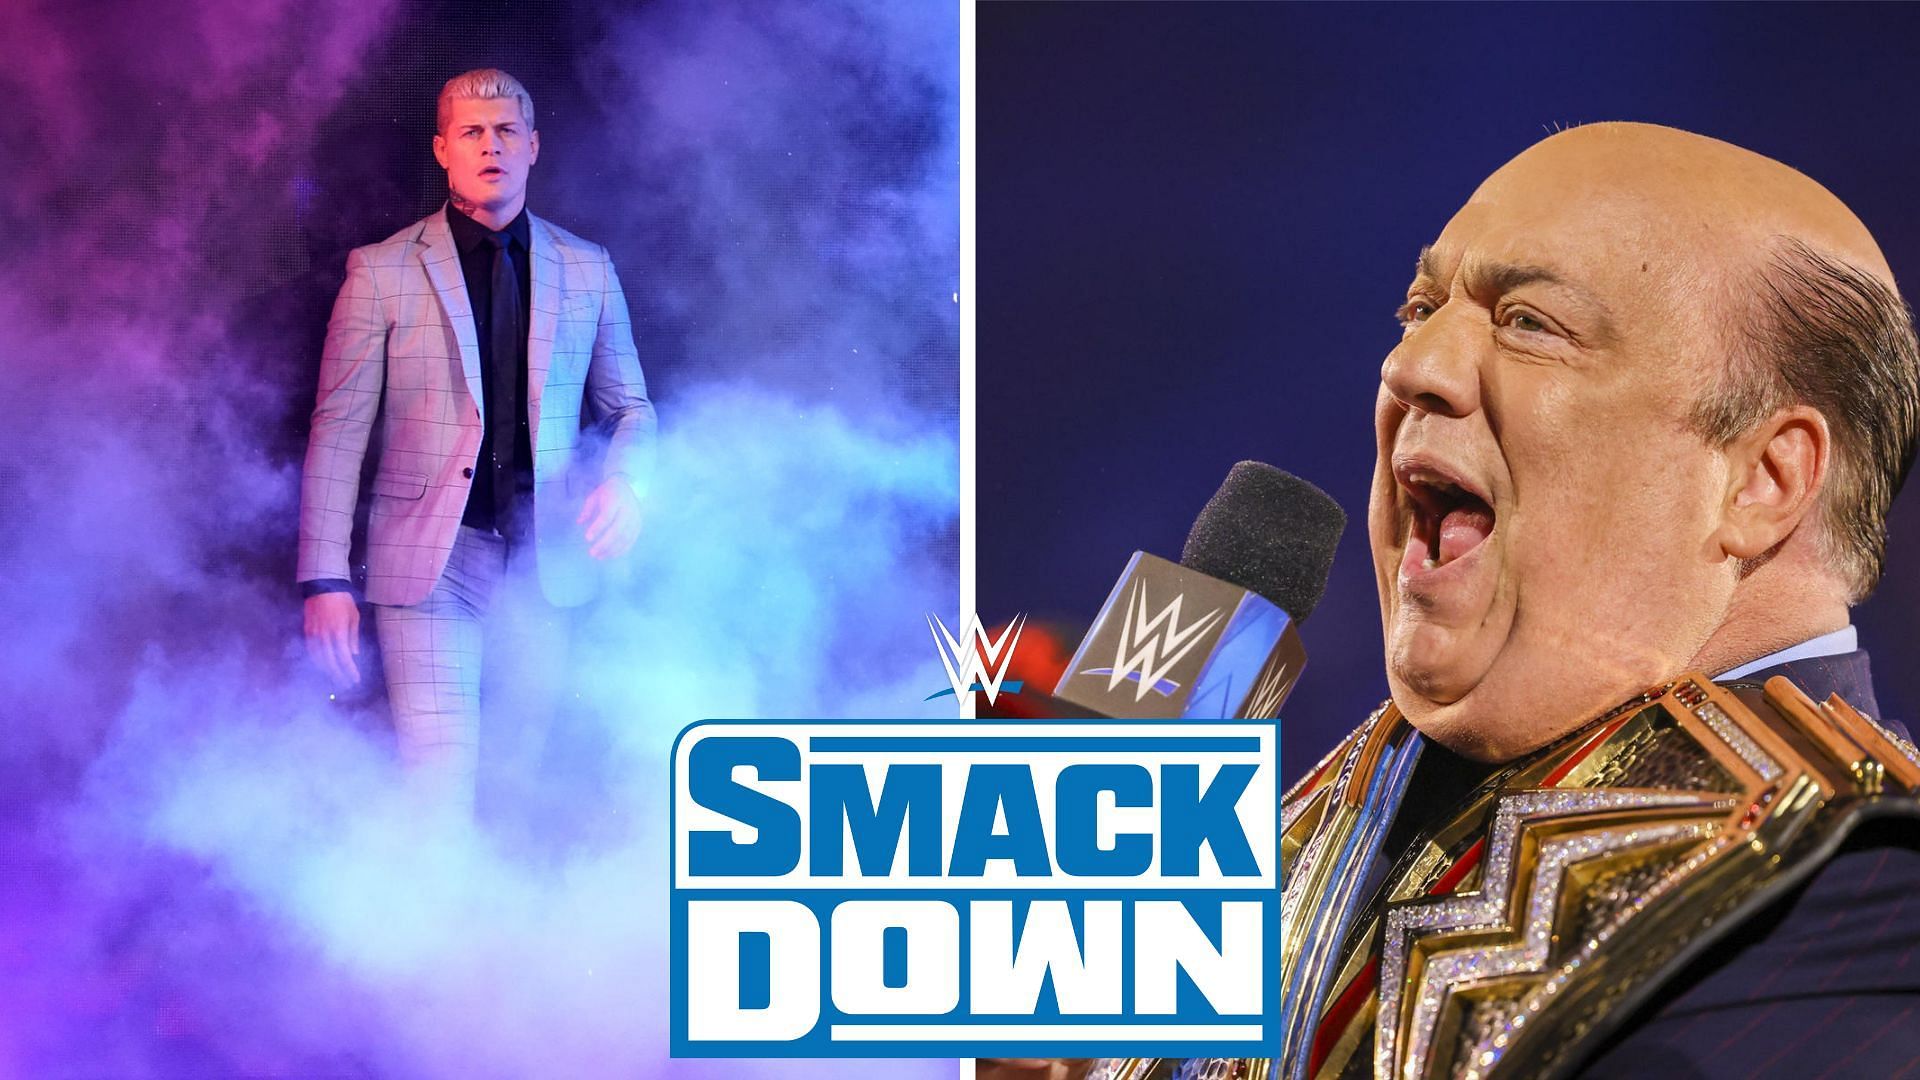 Details for WWE SmackDown